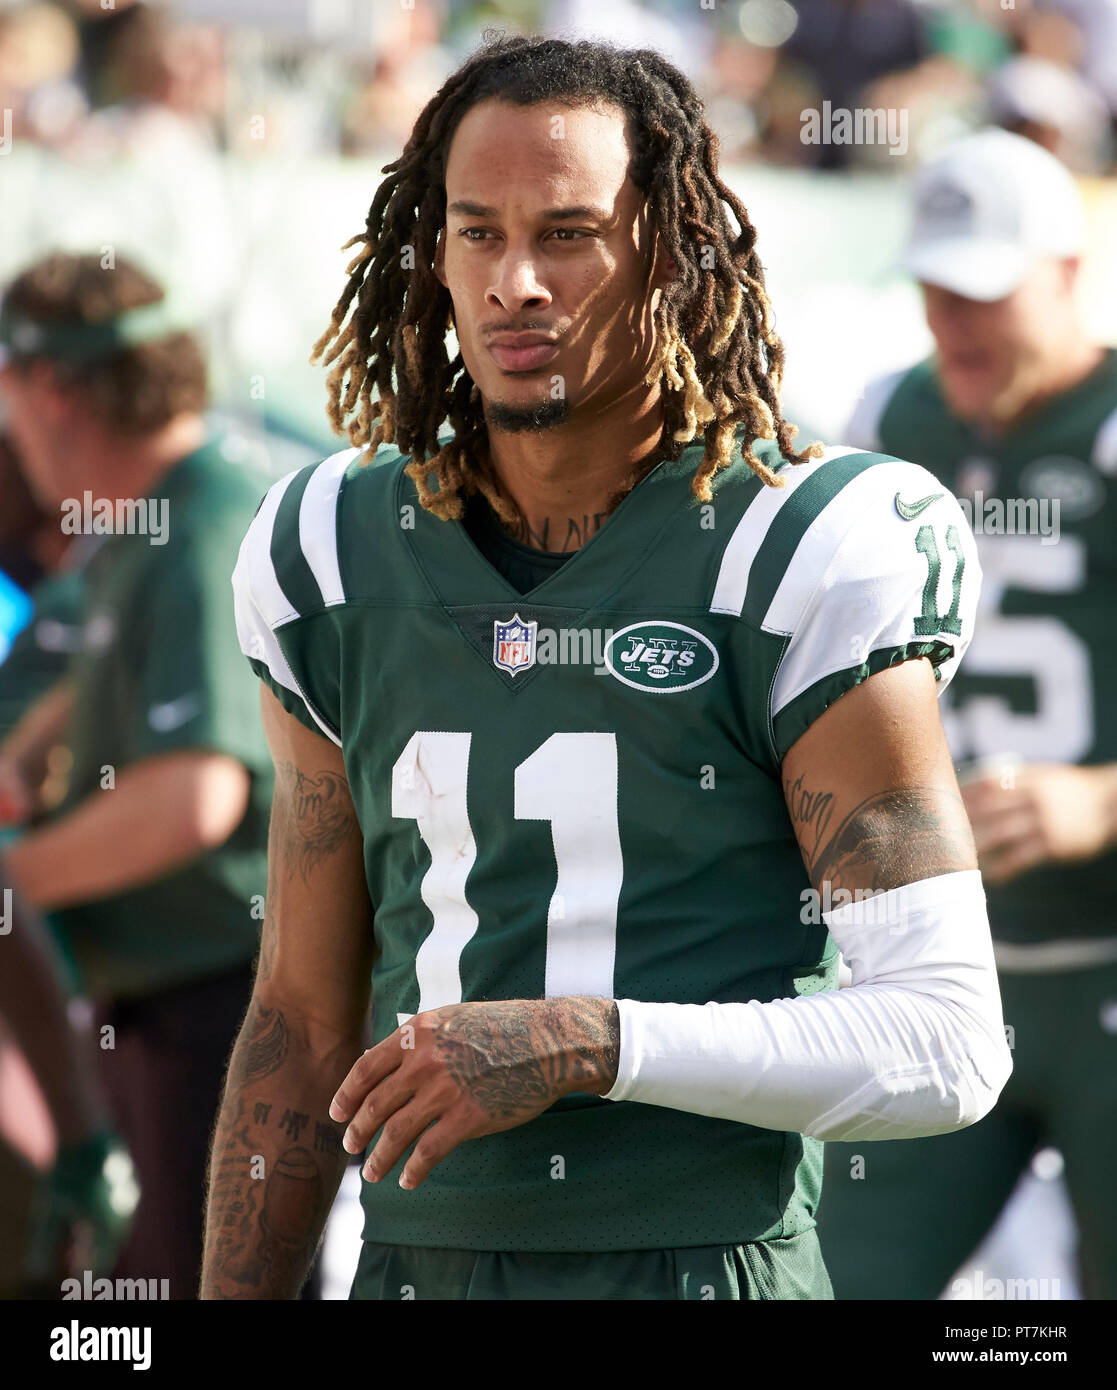 East Rutherford, New Jersey, USA. 7th Oct, 2018. New York Jets wide  receiver Robby Anderson (11) on the sideline during a NFL game between the  Denver Broncos and the New York Jets